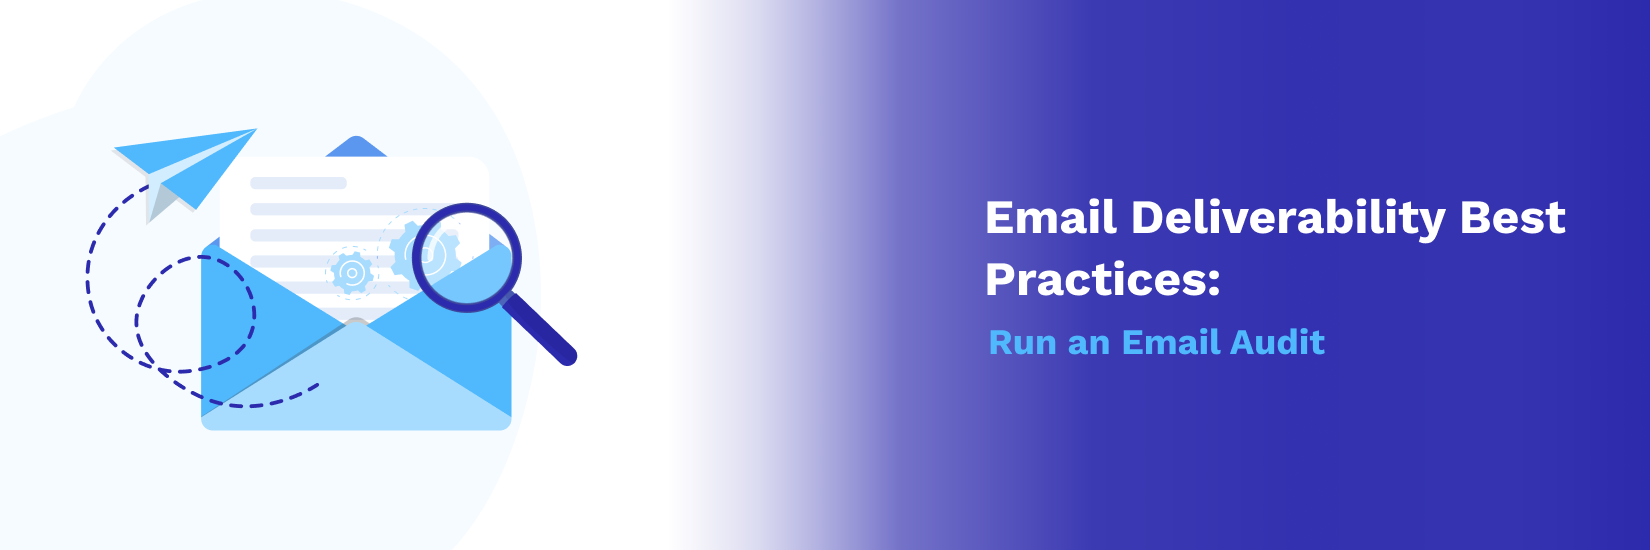 Email Deliverability Best Practices: Email Audit